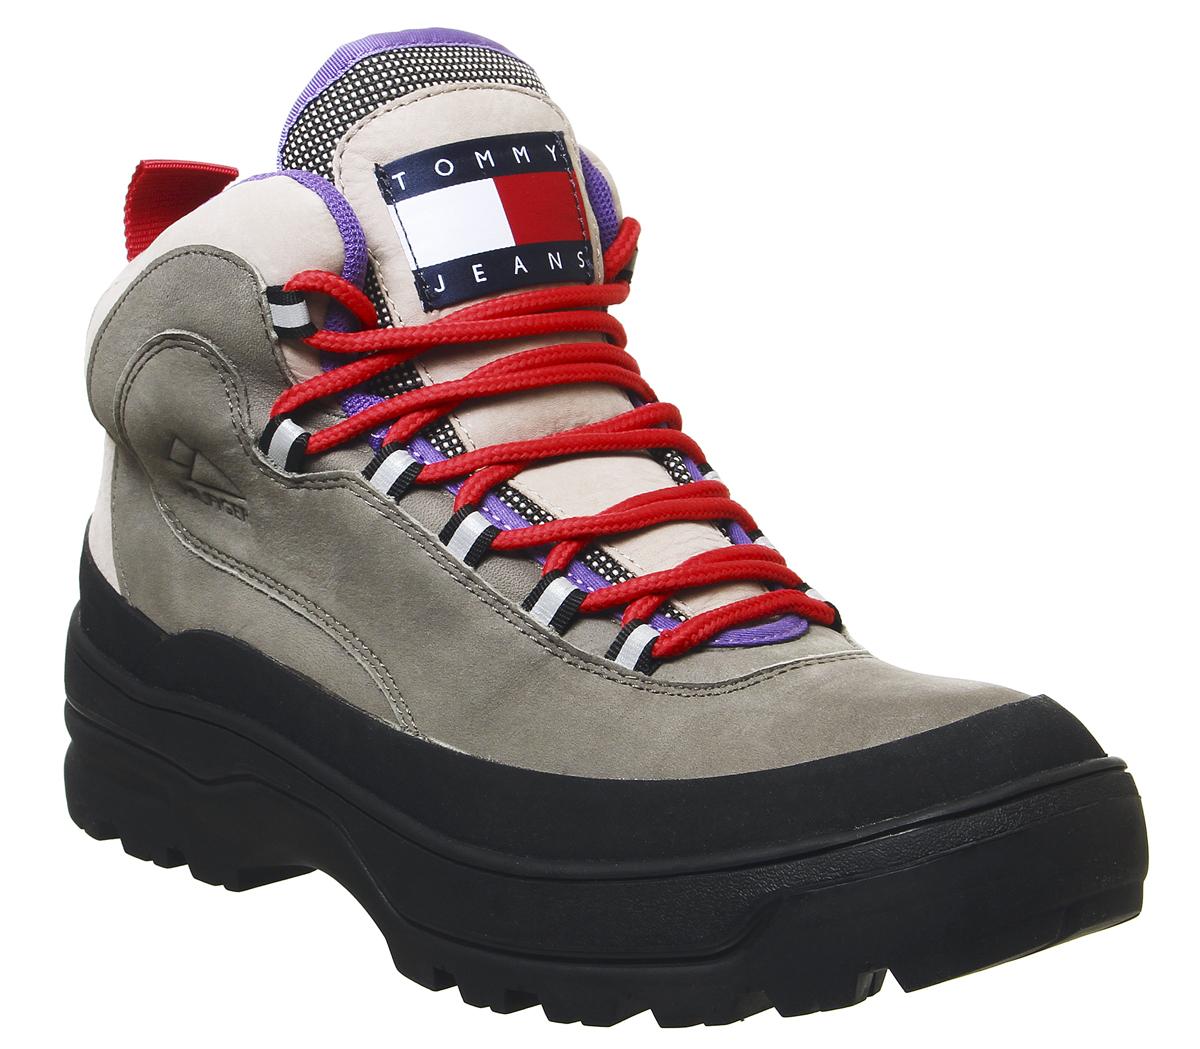 tommy hilfiger red boots